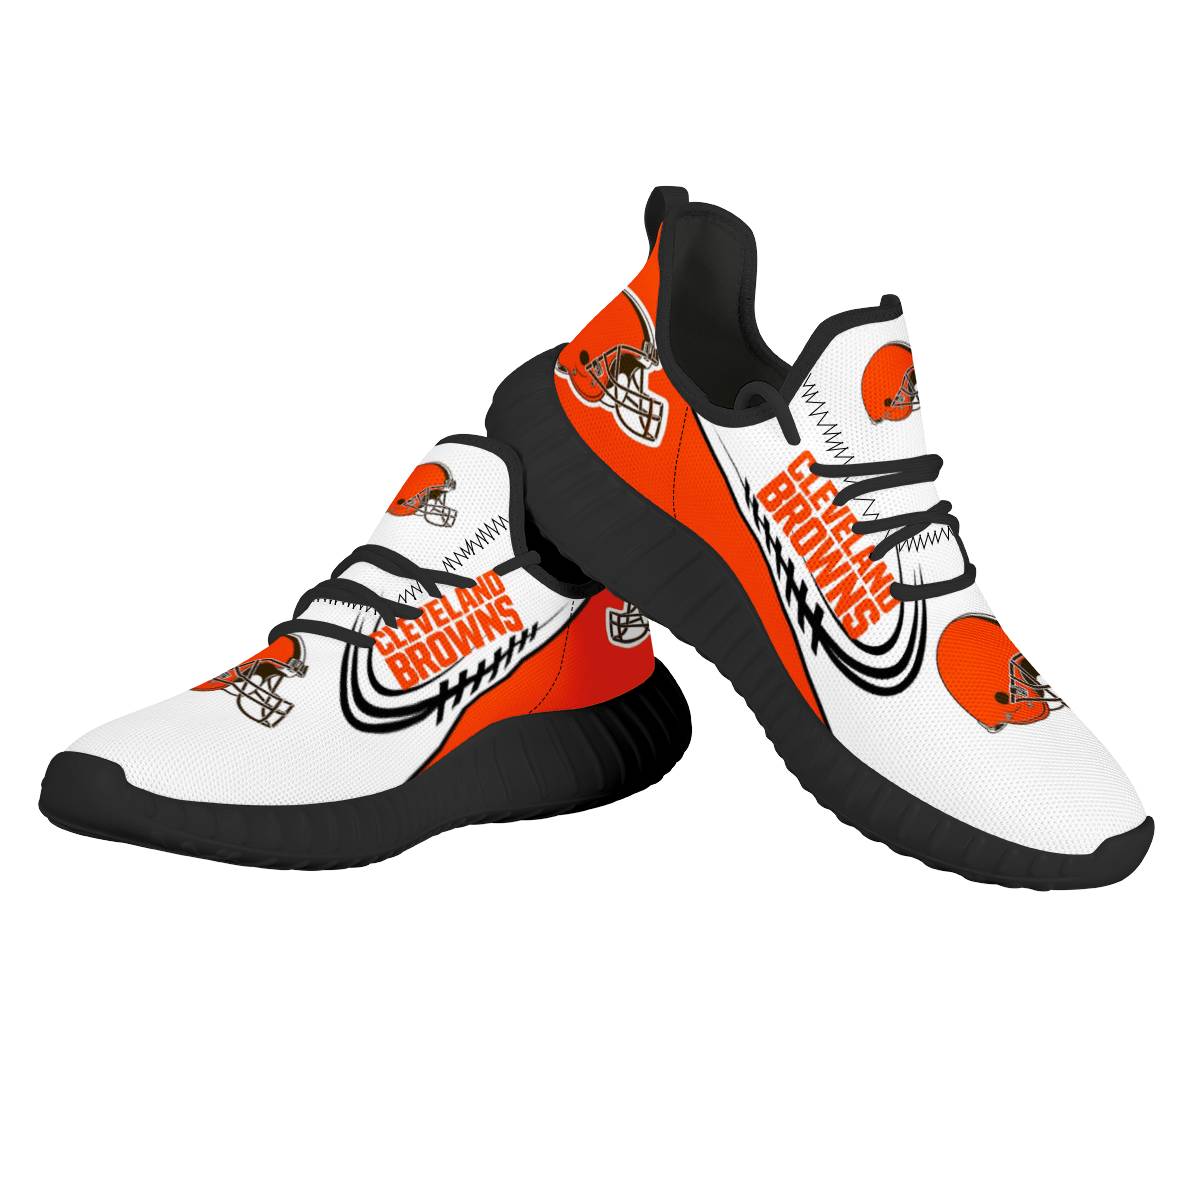 Men's NFL Cleveland Browns Mesh Knit Sneakers/Shoes 001